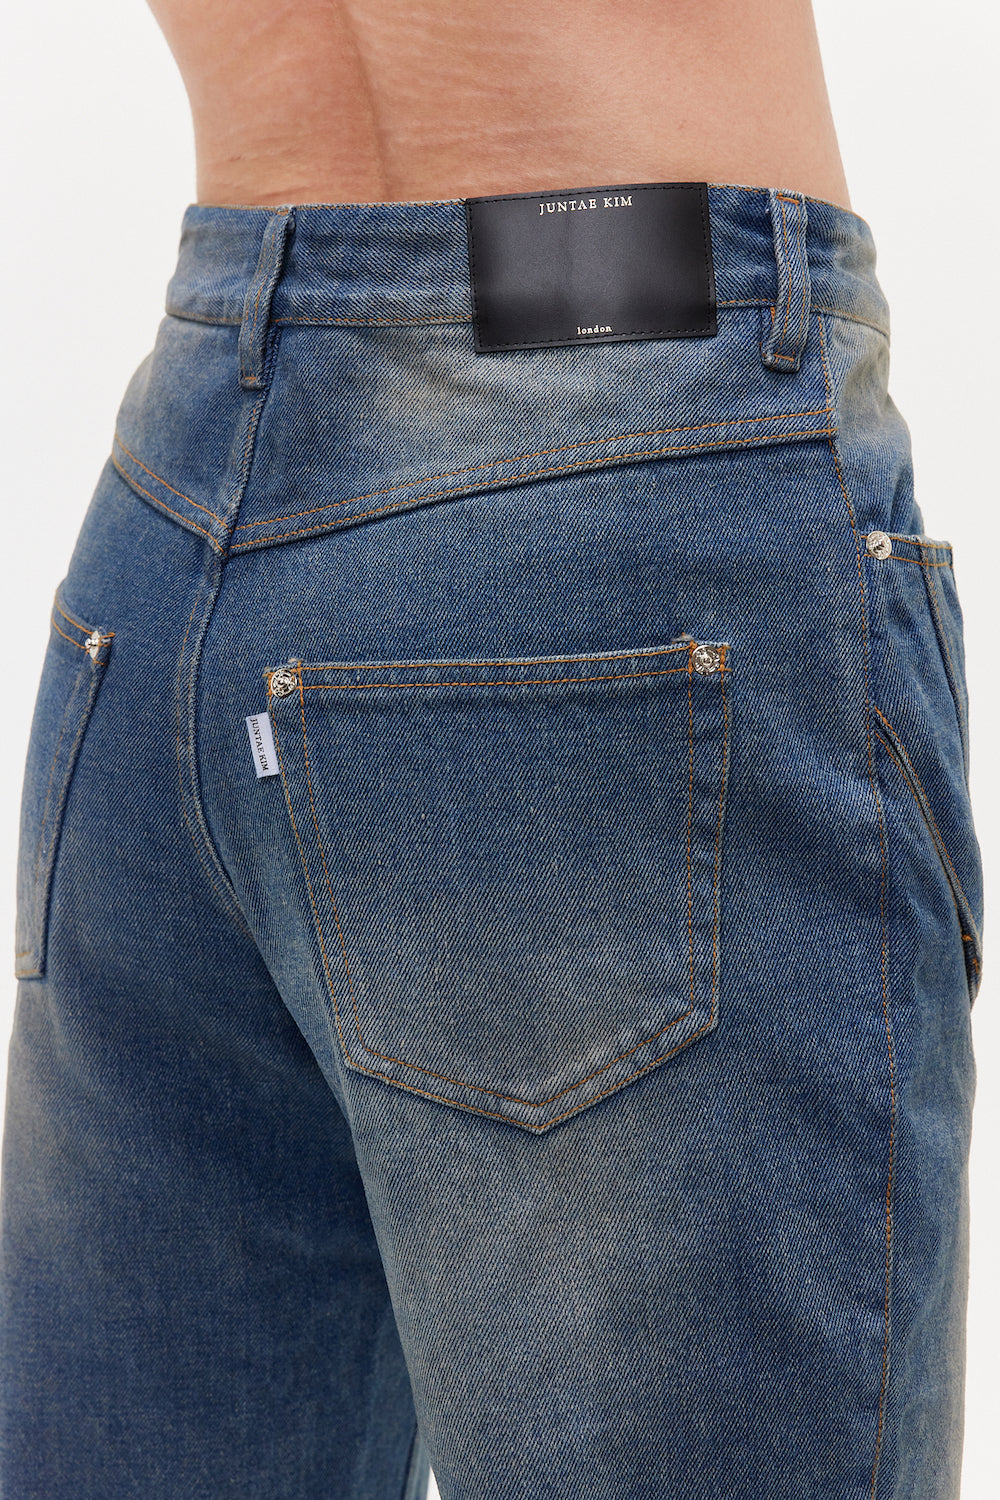 JUNTAE KIM / Washed Corset Jeans - Road Sign- Style Code : 2310192 ...